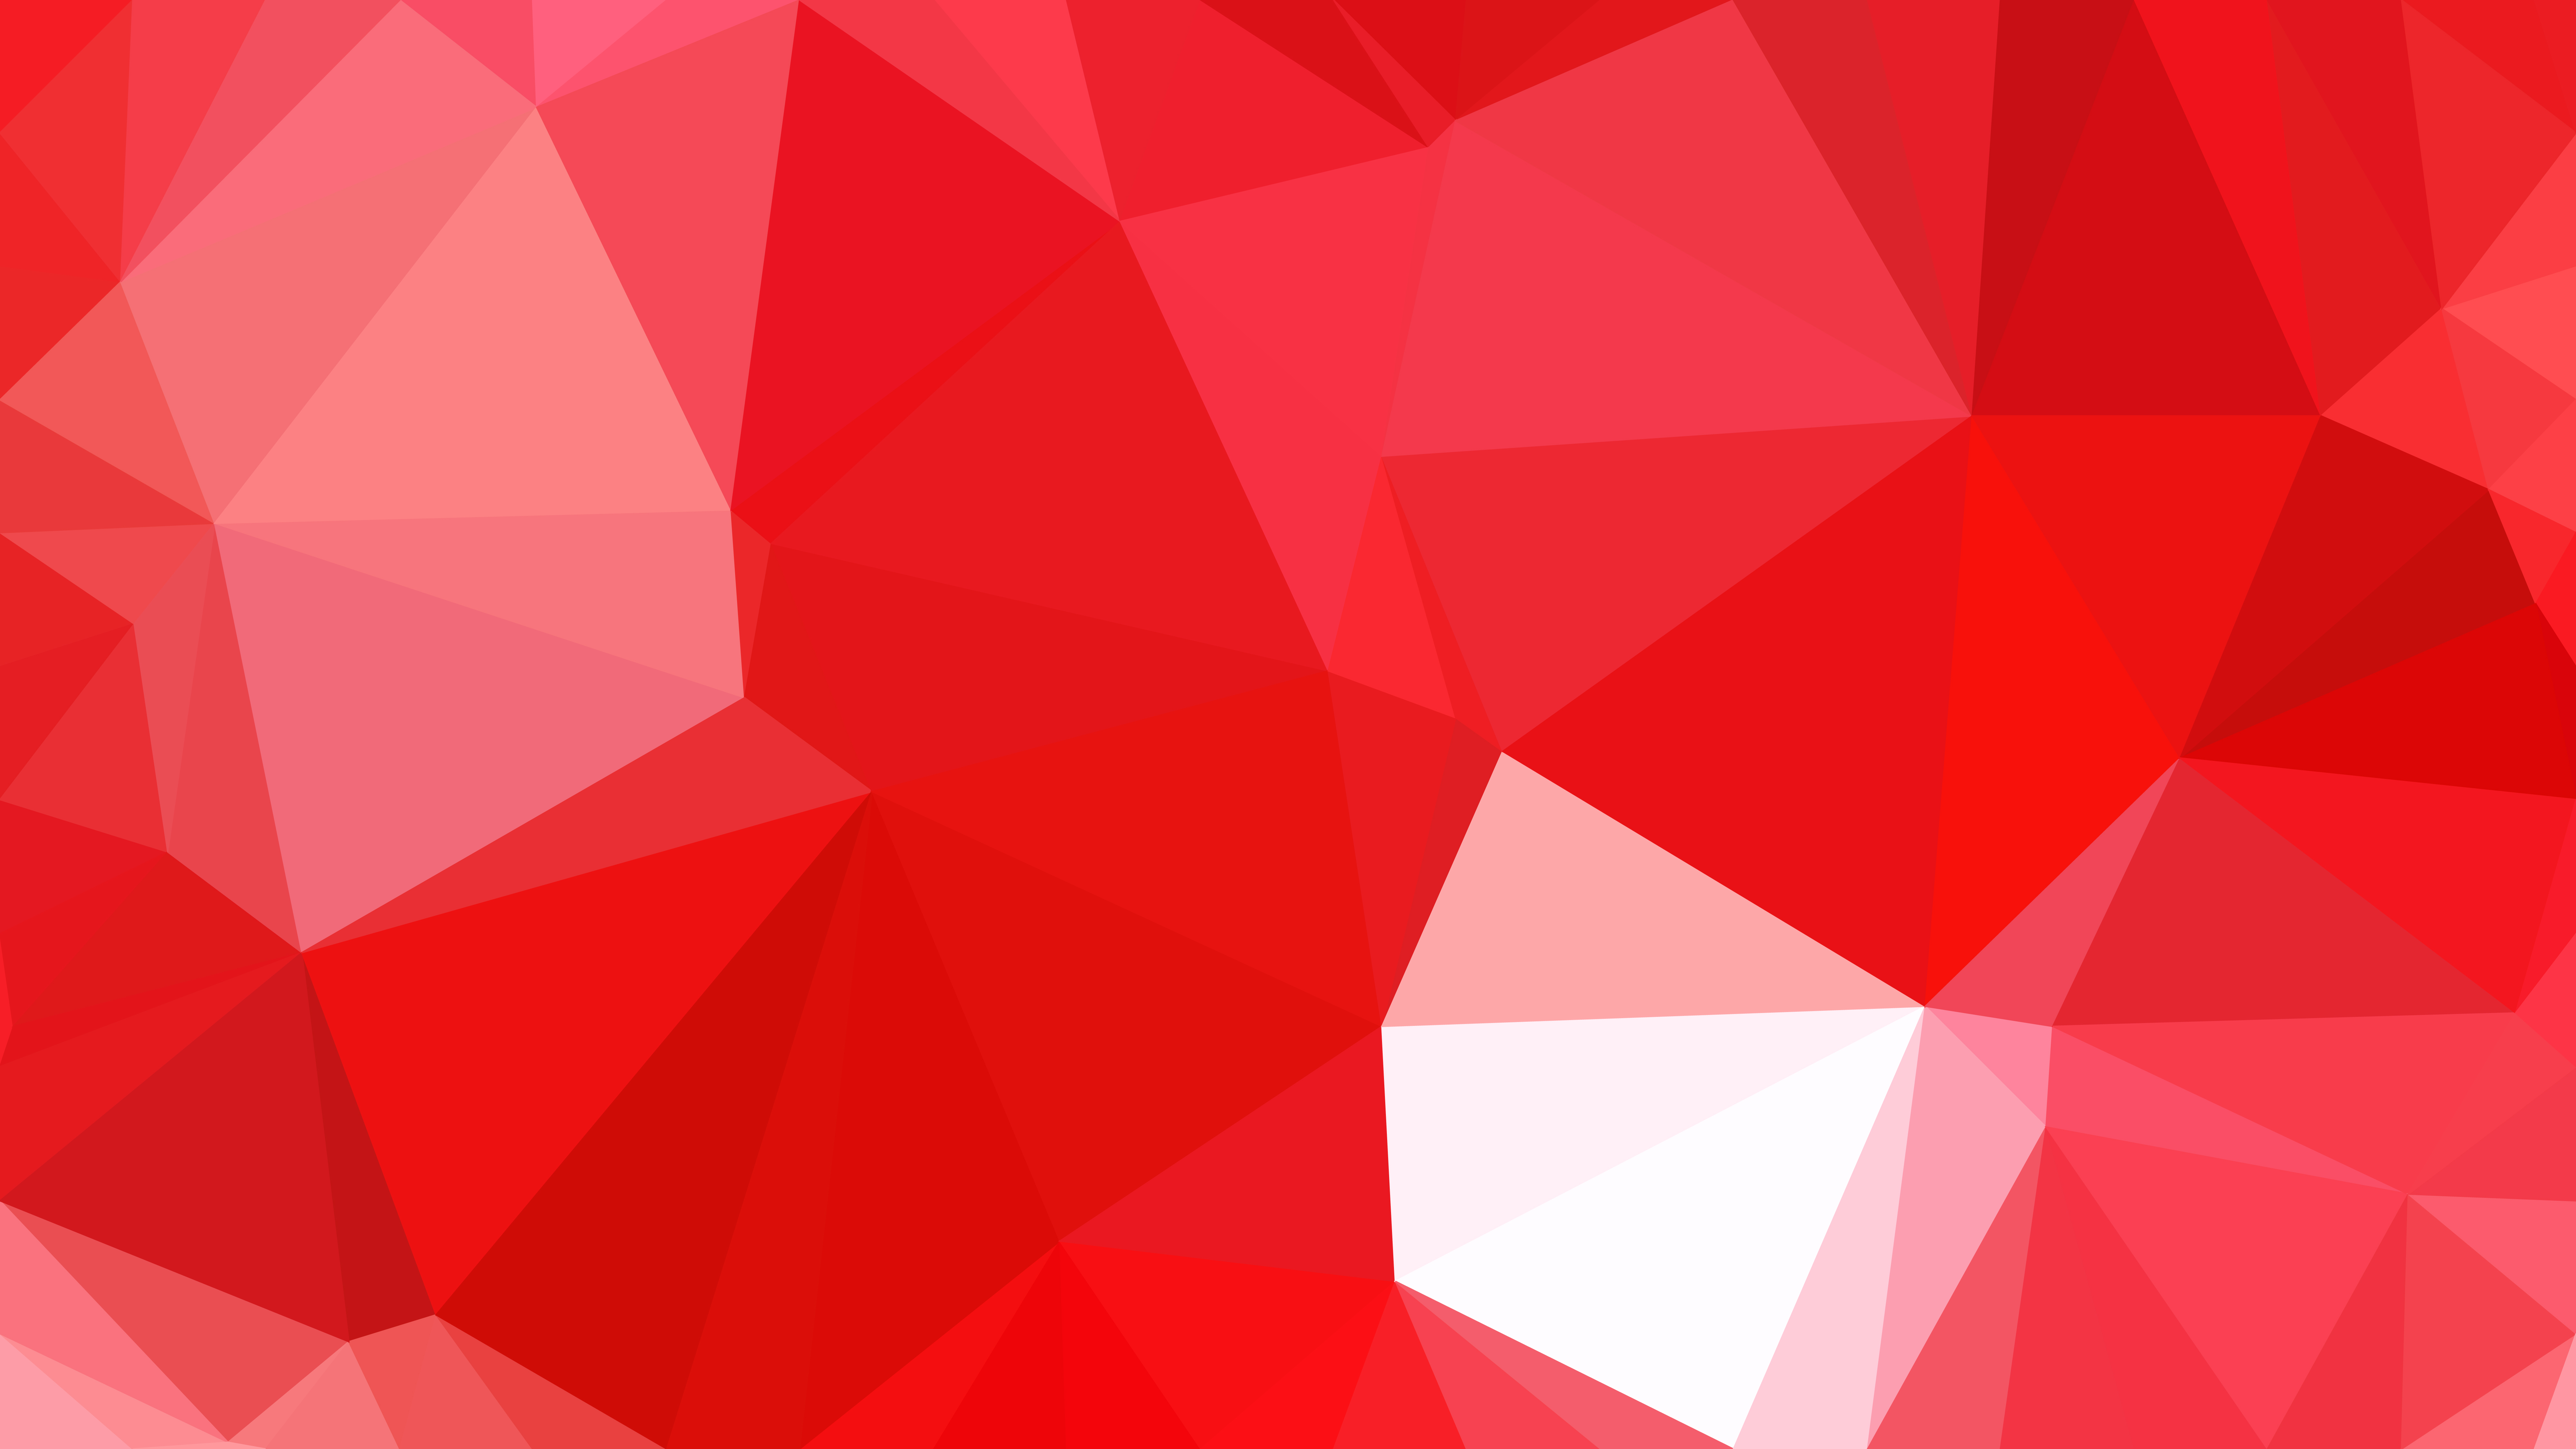 Red and White Polygonal Illustration